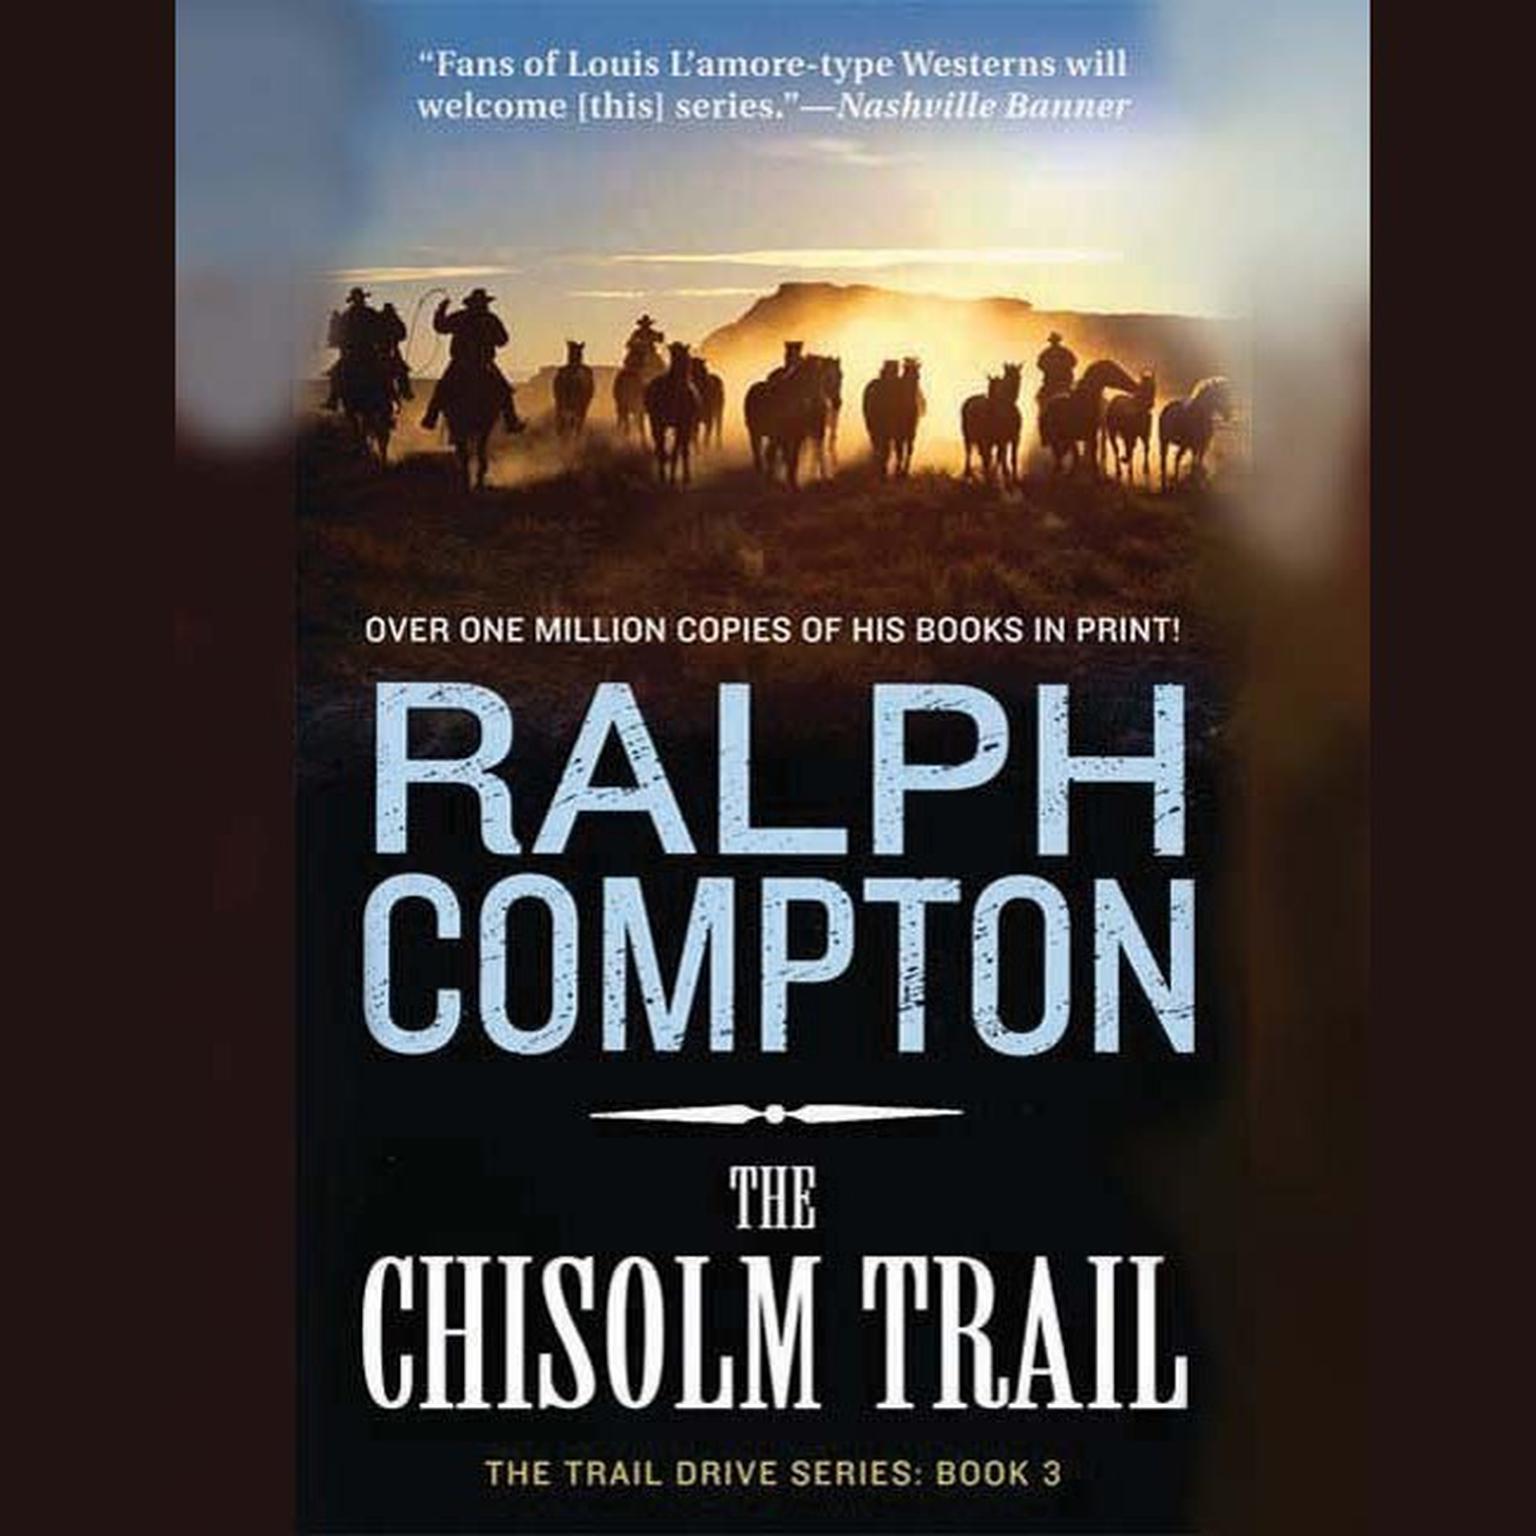 The Chisholm Trail (Abridged): The Trail Drive, Book 3 Audiobook, by Ralph Compton